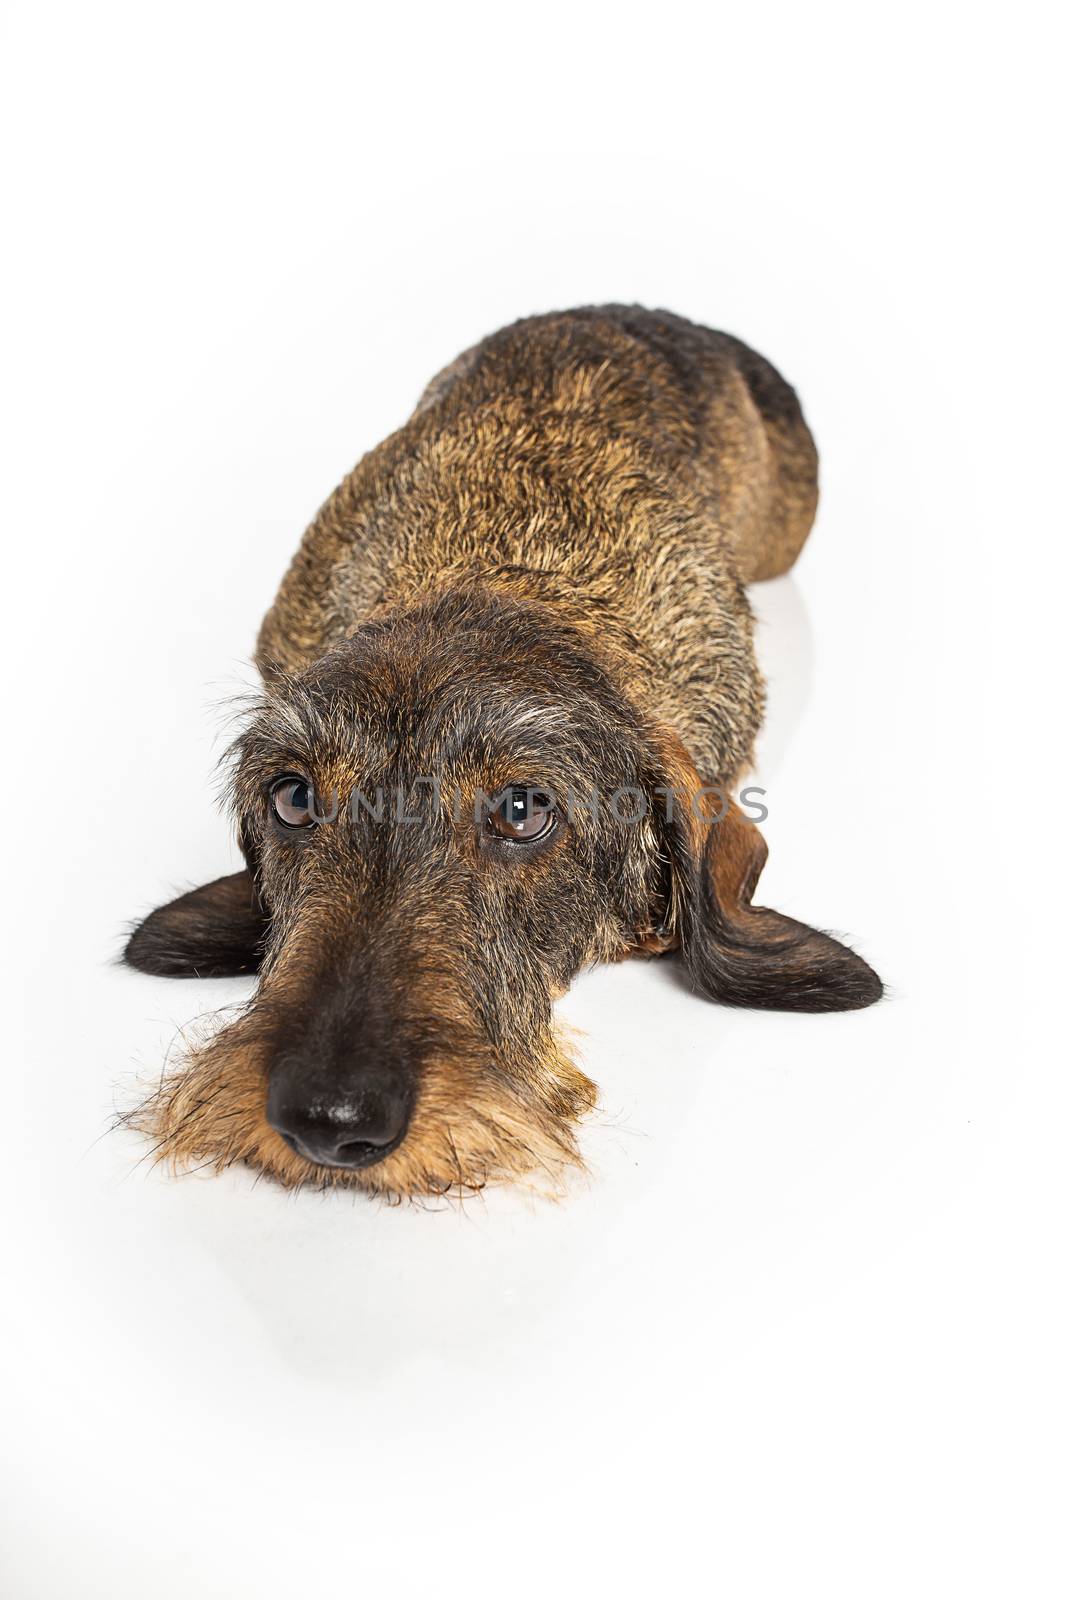 wiener dog laying down, isolated on a white background